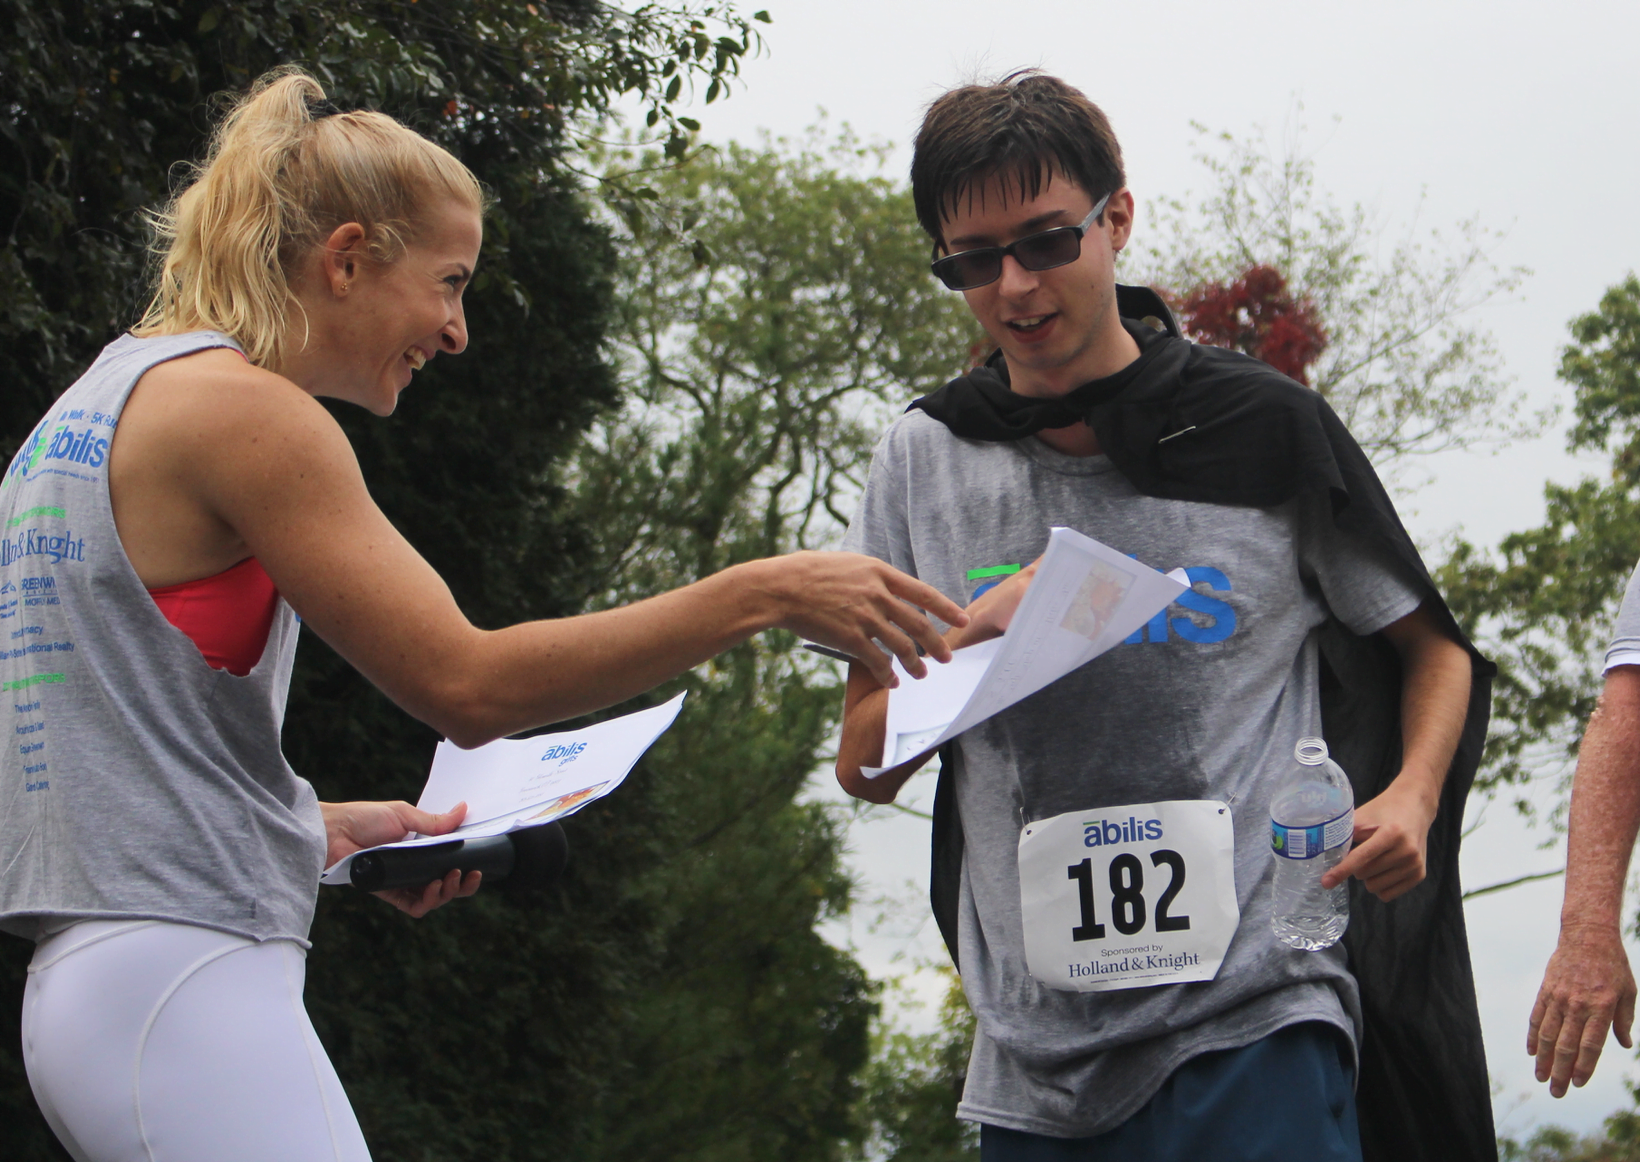 Hundreds turned out for the annual Abilis Walk/Run at Tod's Point in Old Greenwich on October 15. Photo: Leslie Yager